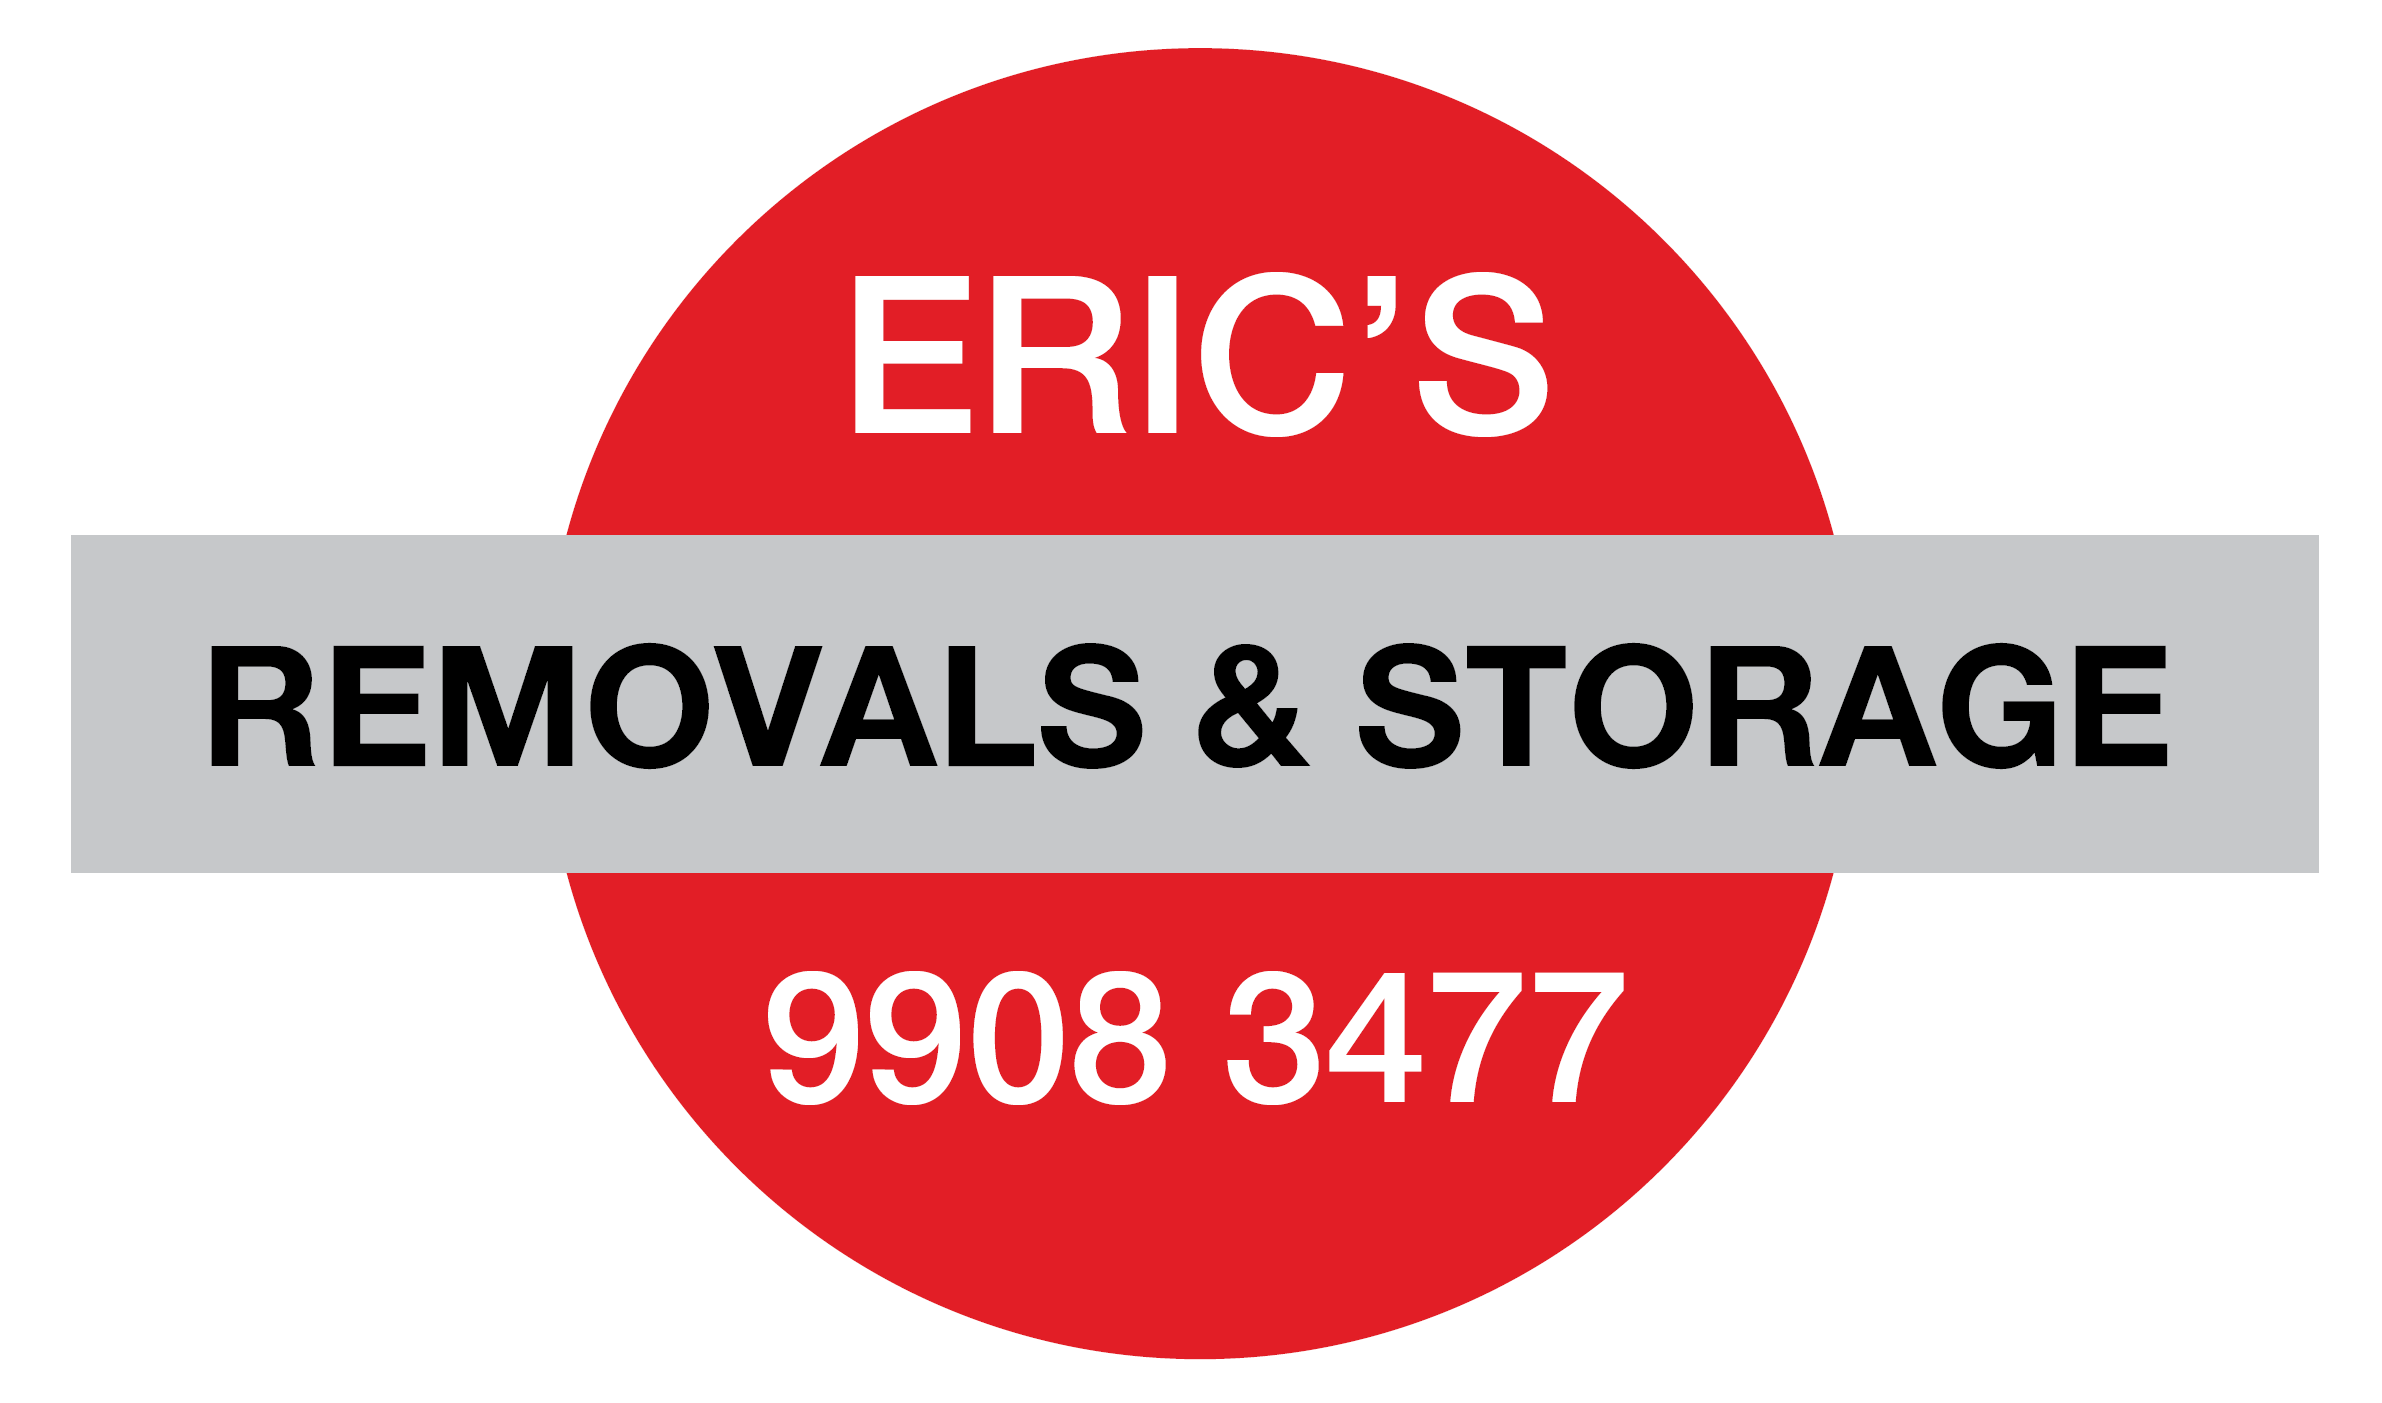 Eric’s Removals